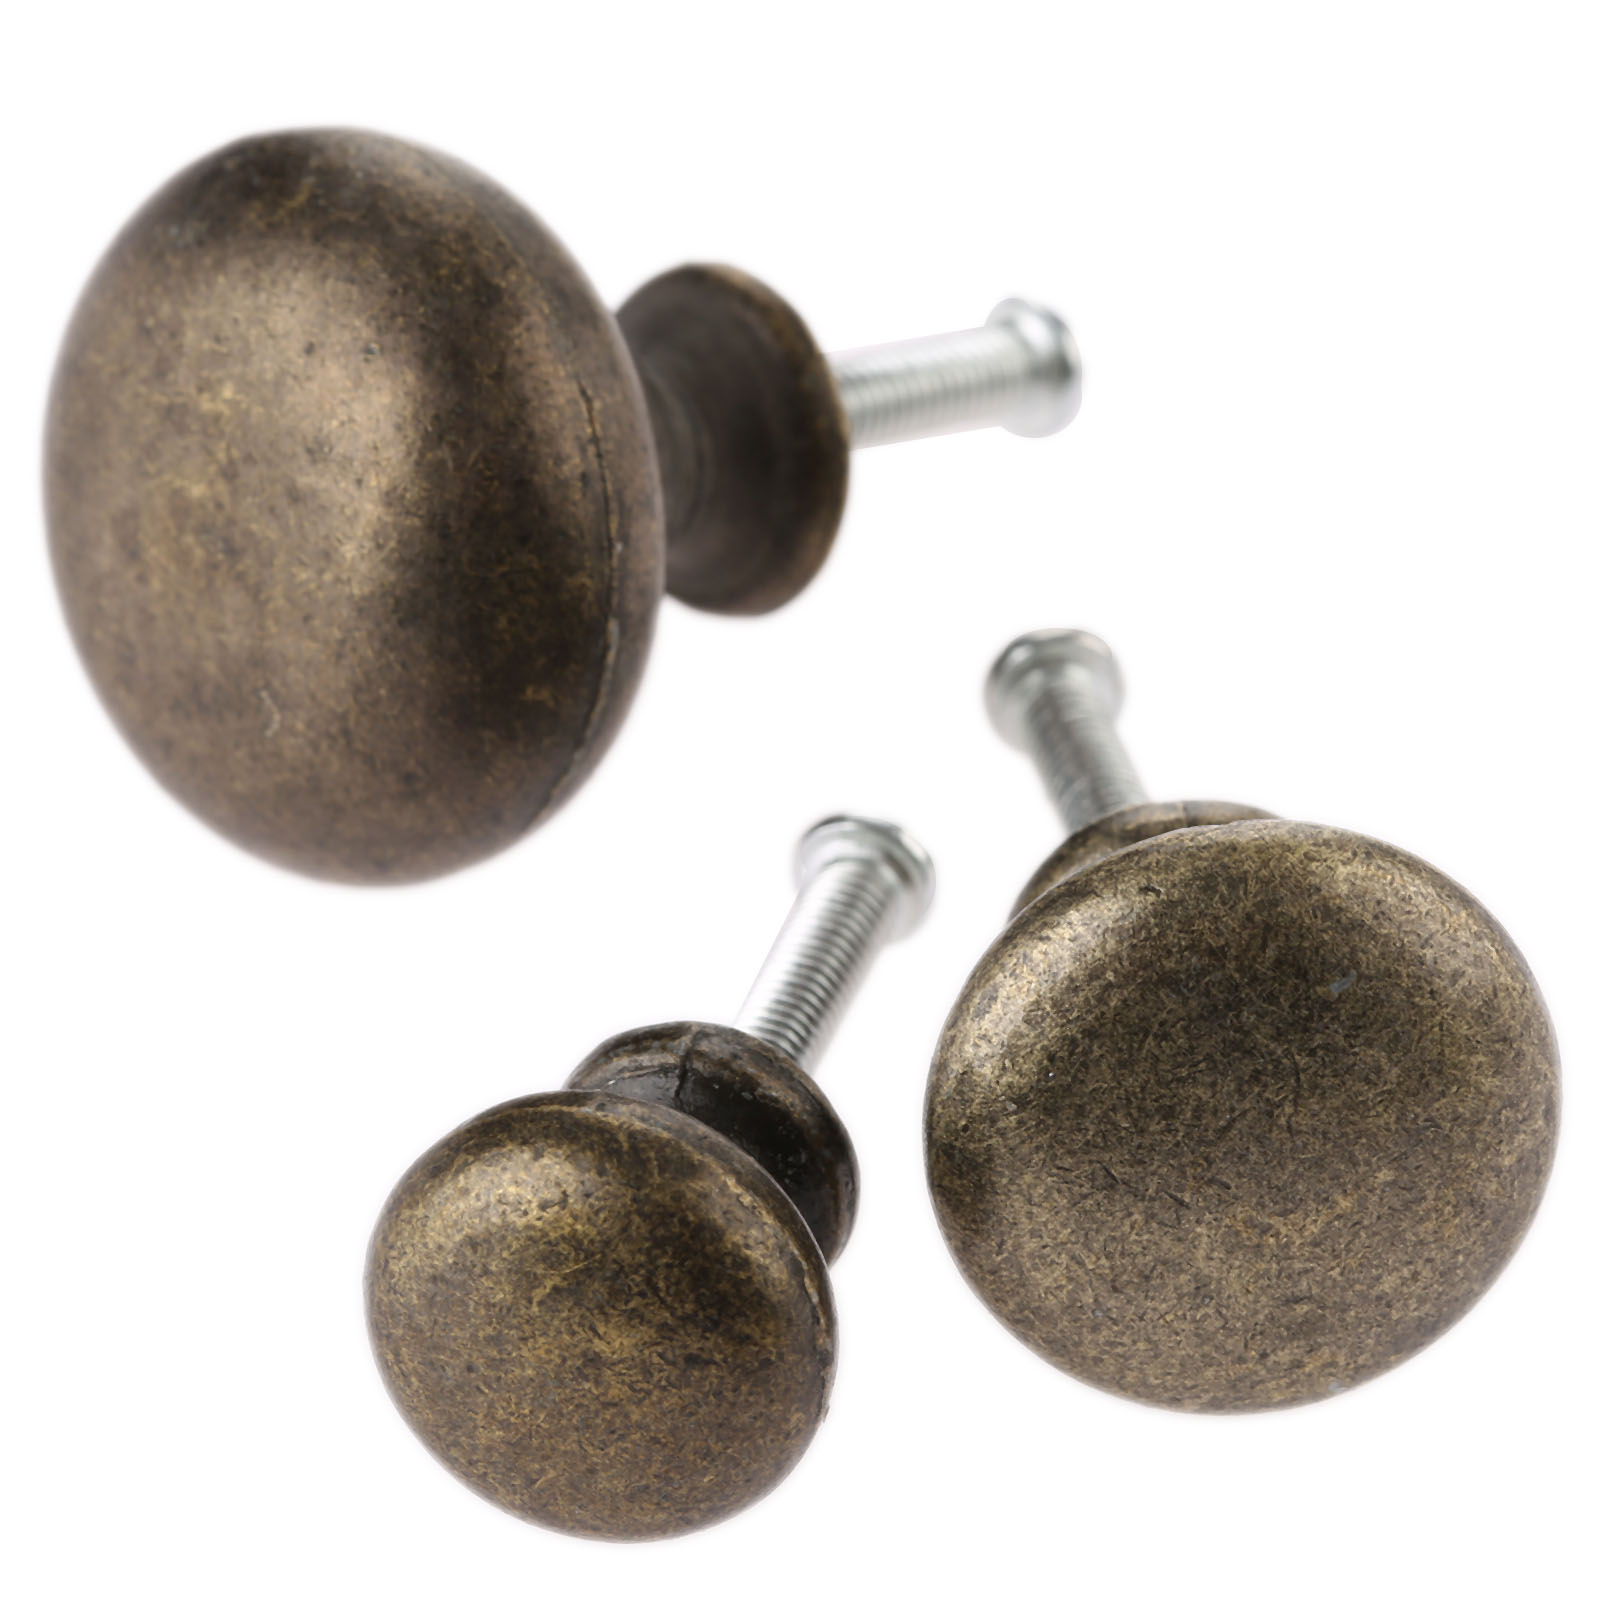 Antique Bronze Furniture Handle Knob Mini Jewelry Box Knobs and Pull Drawer Cupboard Cabinet Pull Handles Furniture Hardware